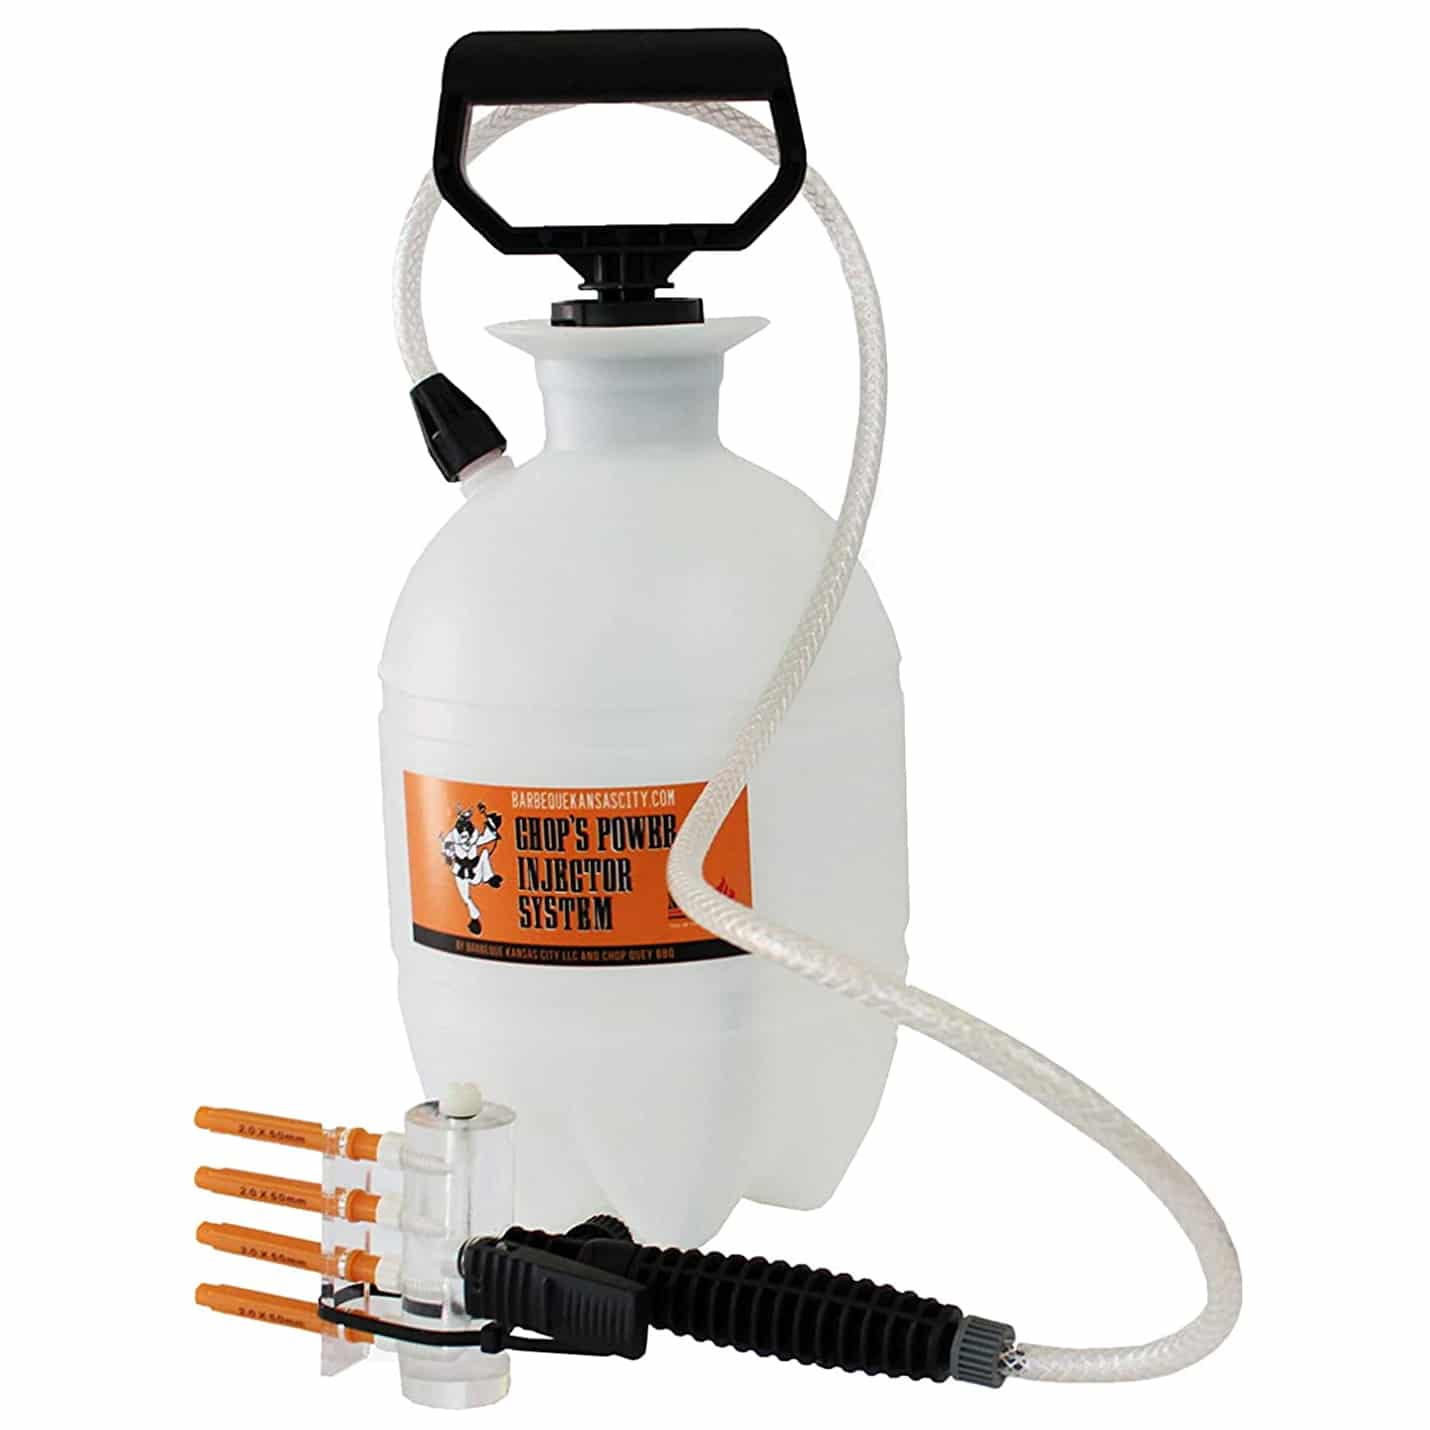 Chop's Power Injector System, 1 Gallon